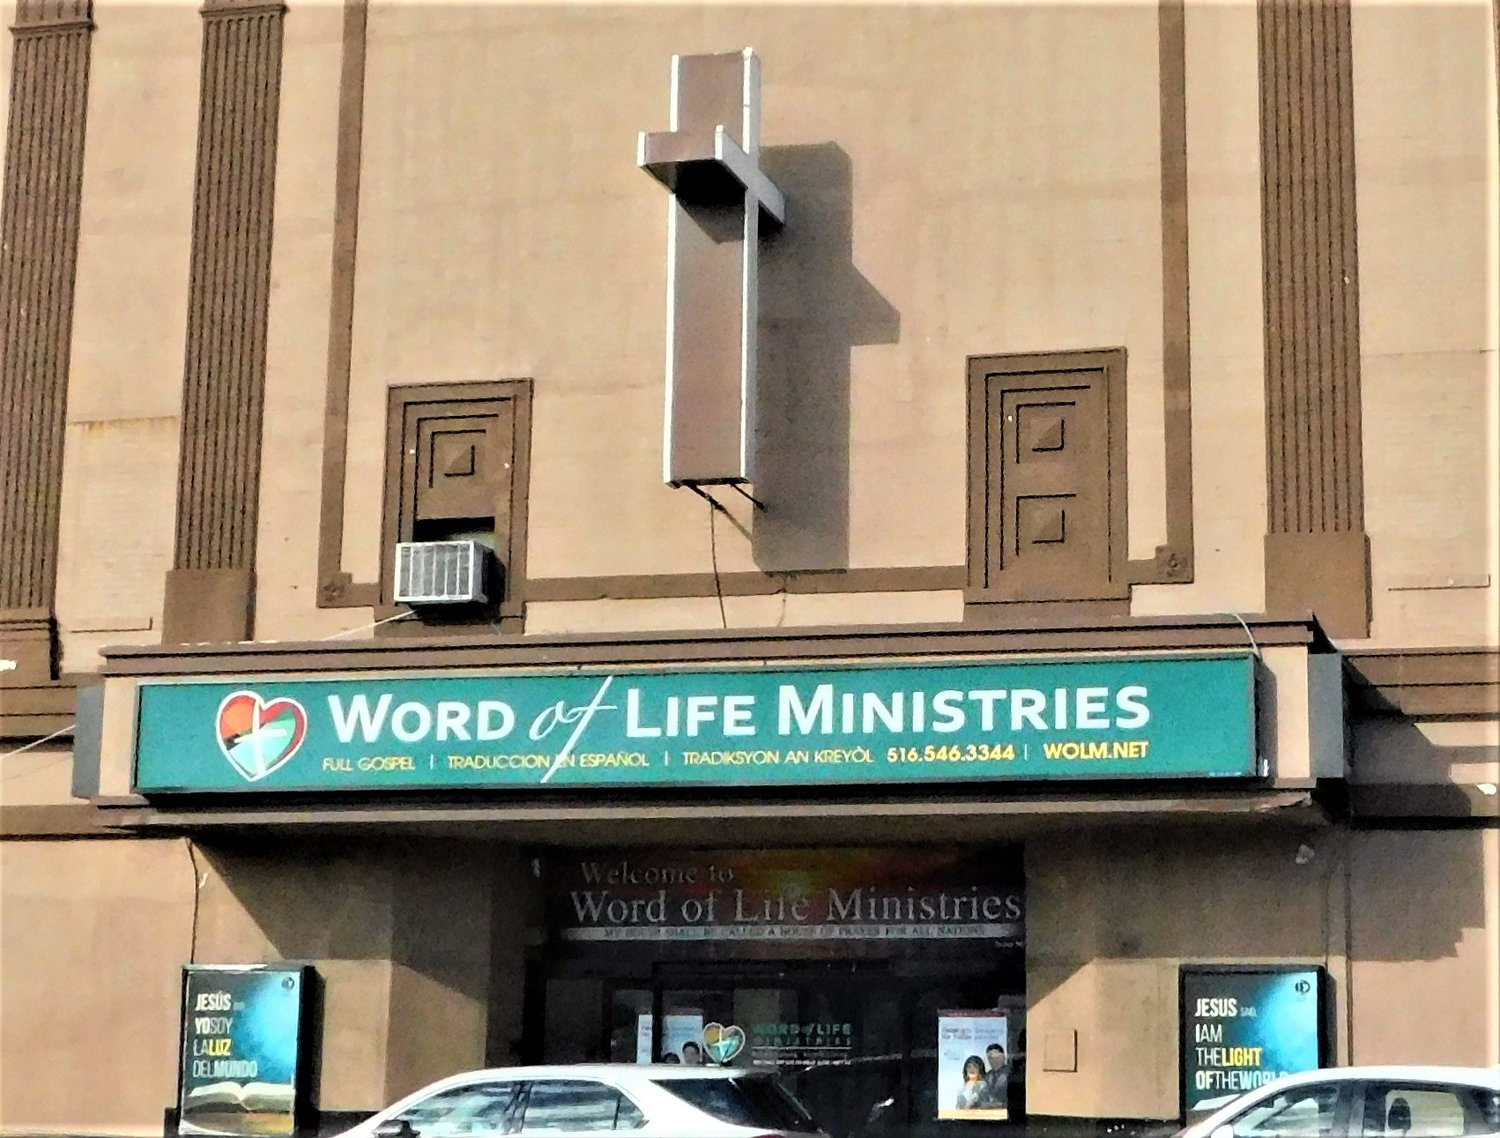 The church at 80 W. Merrick Rd. has a diverse and multilingual ministry.